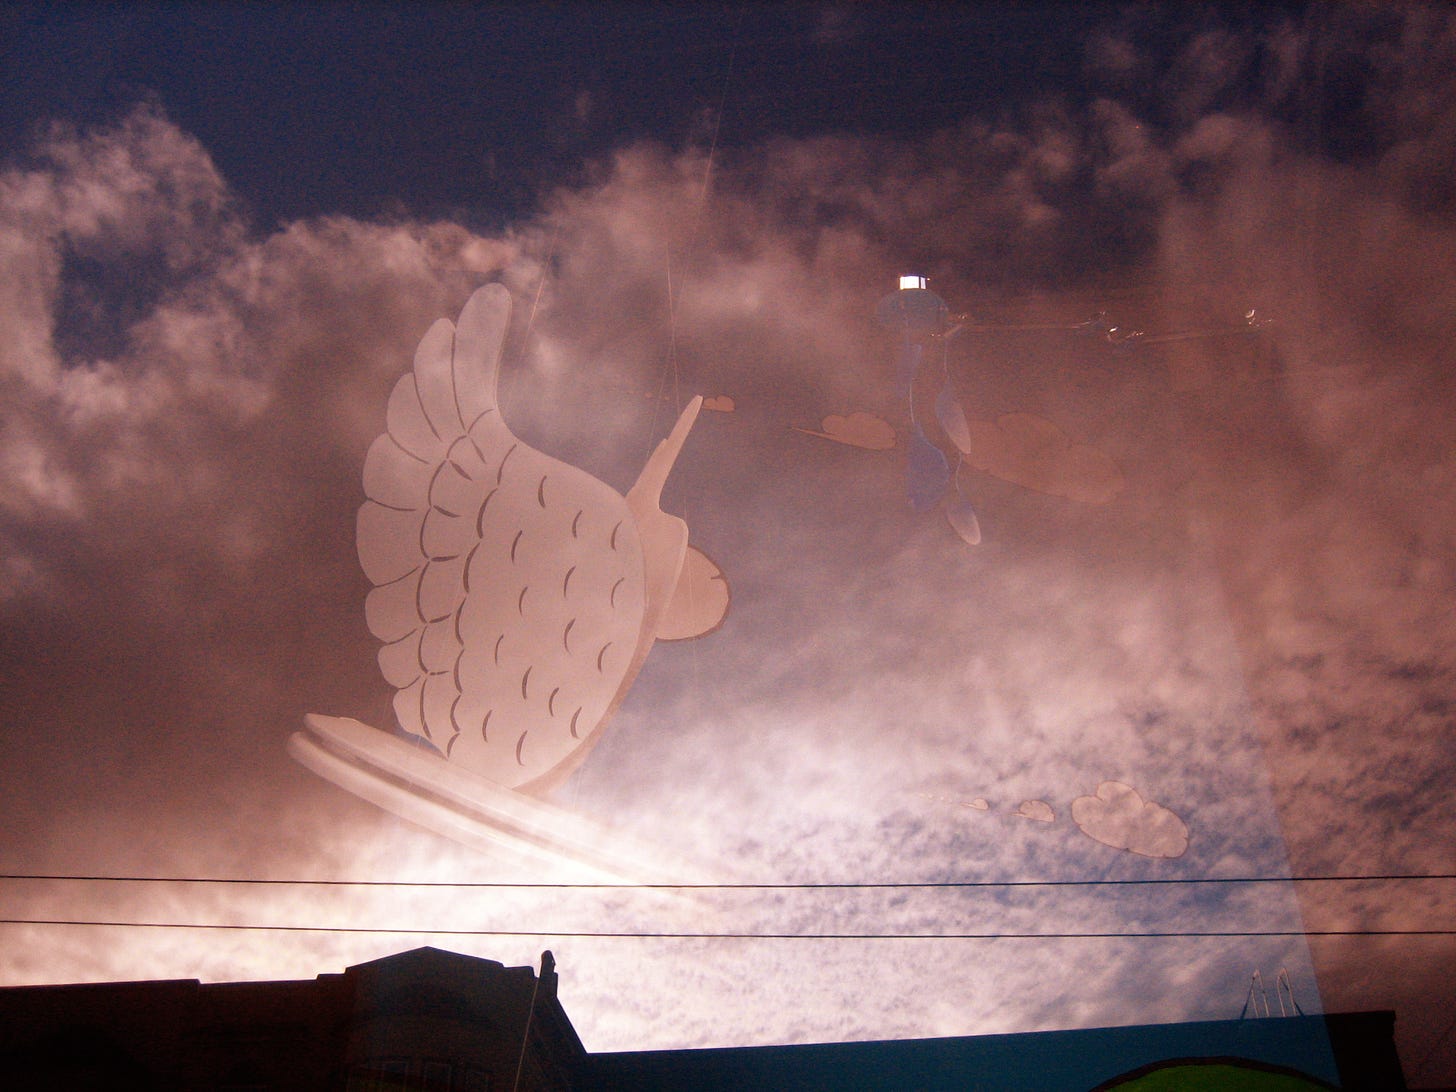 Photo by arod, May 2006, of a reflection of a figure and clouds in a window